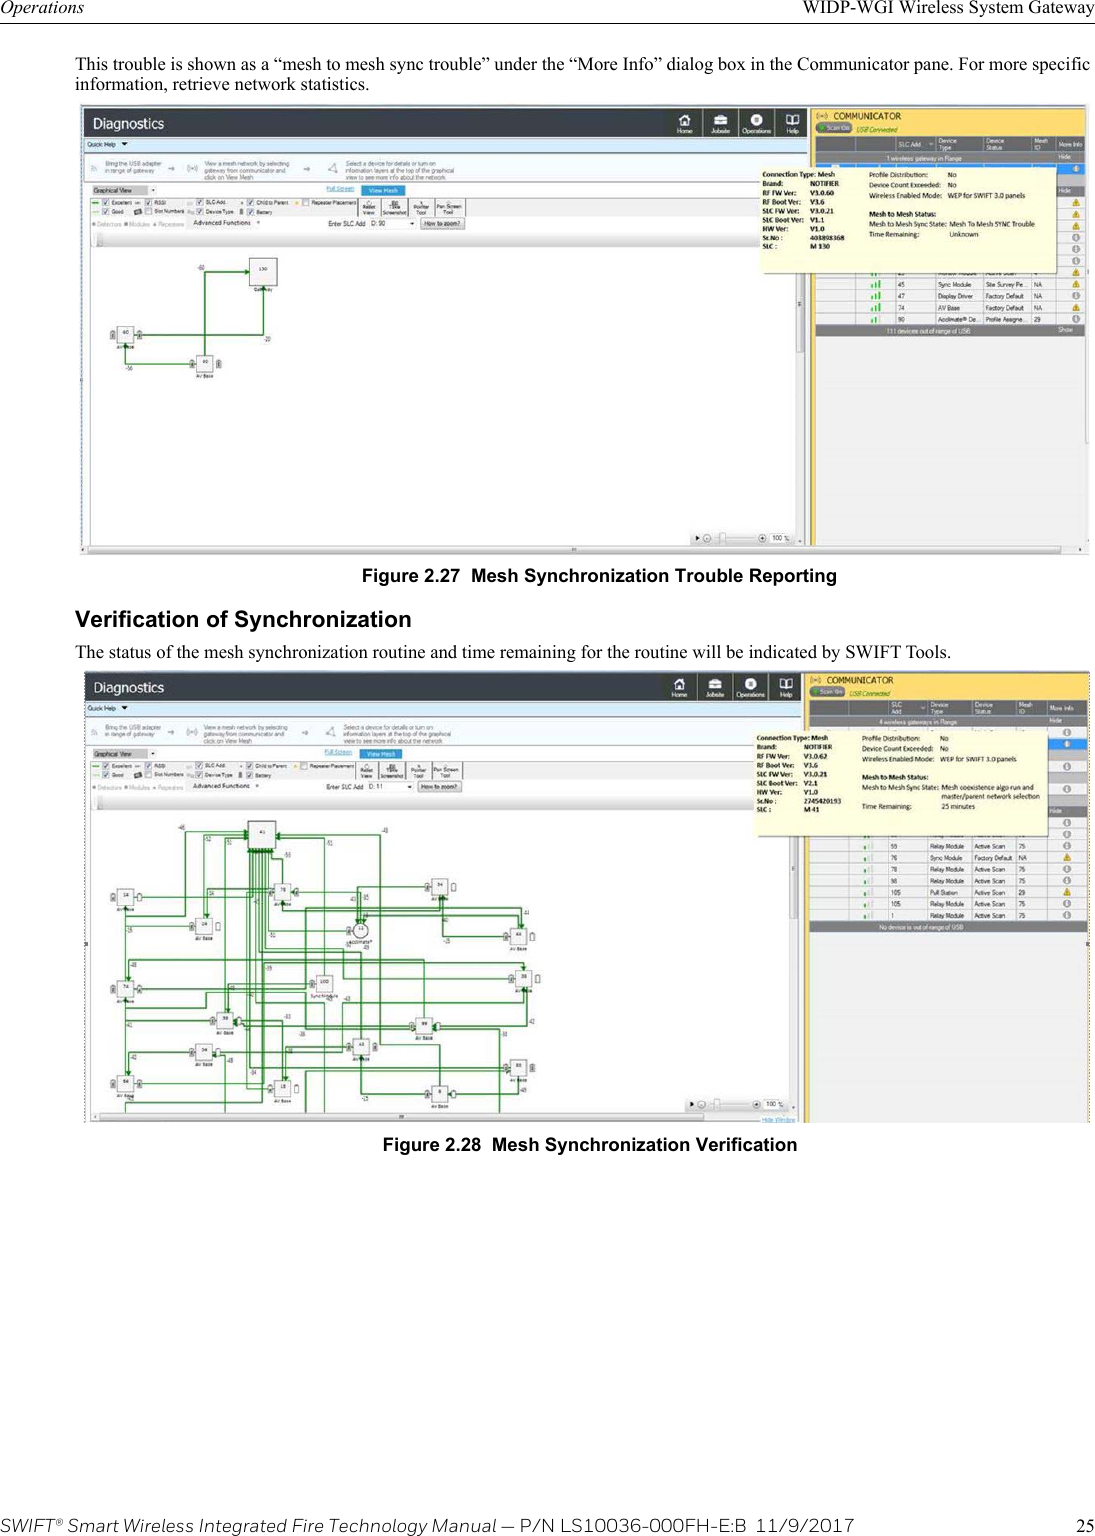 SWIFT® Smart Wireless Integrated Fire Technology Manual — P/N LS10036-000FH-E:B  11/9/2017 25Operations WIDP-WGI Wireless System GatewayThis trouble is shown as a “mesh to mesh sync trouble” under the “More Info” dialog box in the Communicator pane. For more specific information, retrieve network statistics. Verification of SynchronizationThe status of the mesh synchronization routine and time remaining for the routine will be indicated by SWIFT Tools. Figure 2.27  Mesh Synchronization Trouble ReportingFigure 2.28  Mesh Synchronization Verification